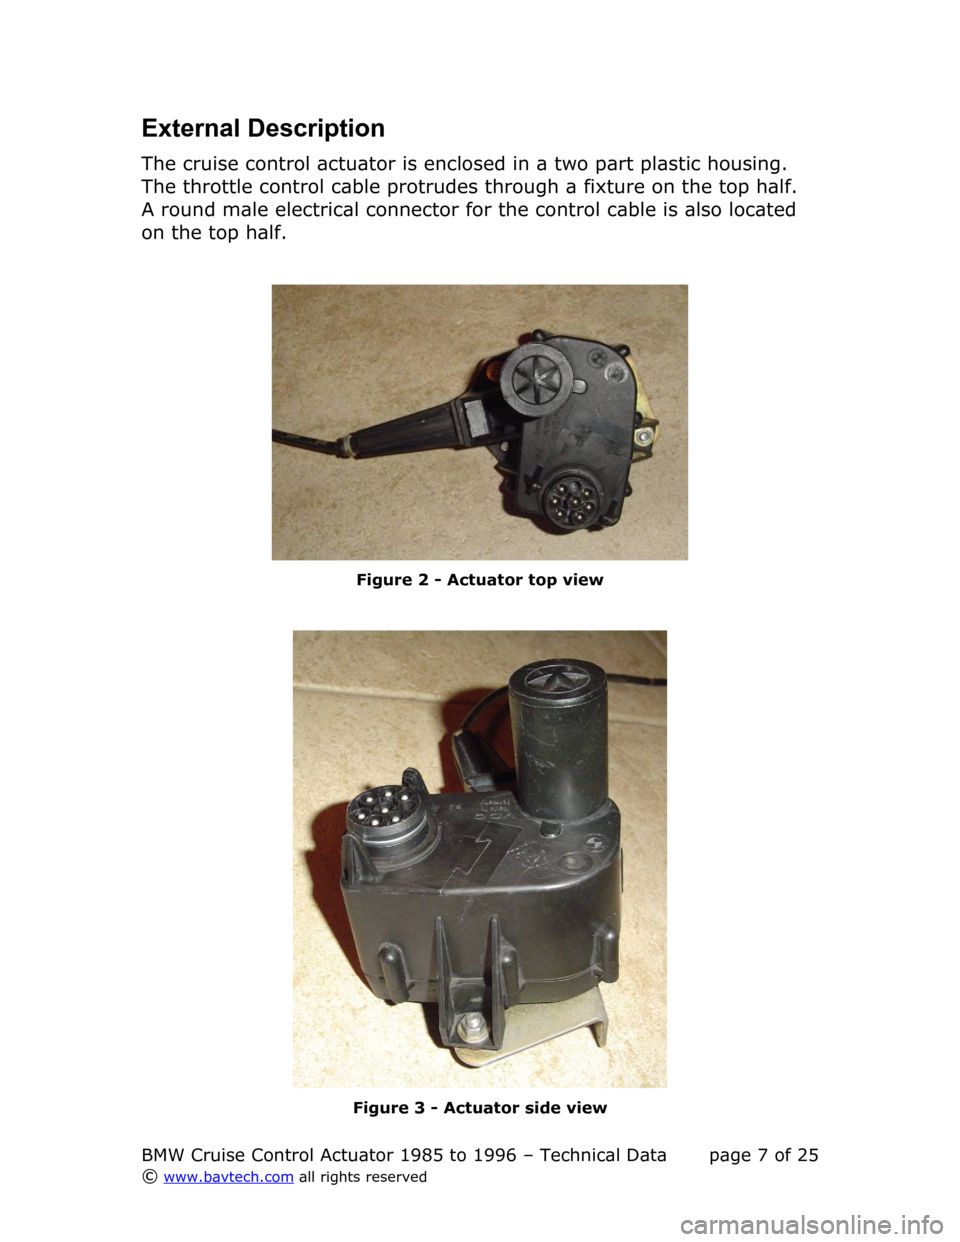 BMW 3 SERIES 1993 E36 Cruise Control Acutator Technical Data Workshop Manual External Description
The cruise control actuator is enclosed in a two part plastic housing.  
The throttle control cable protrudes through a fixture on the top half.  
A round male electrical connecto